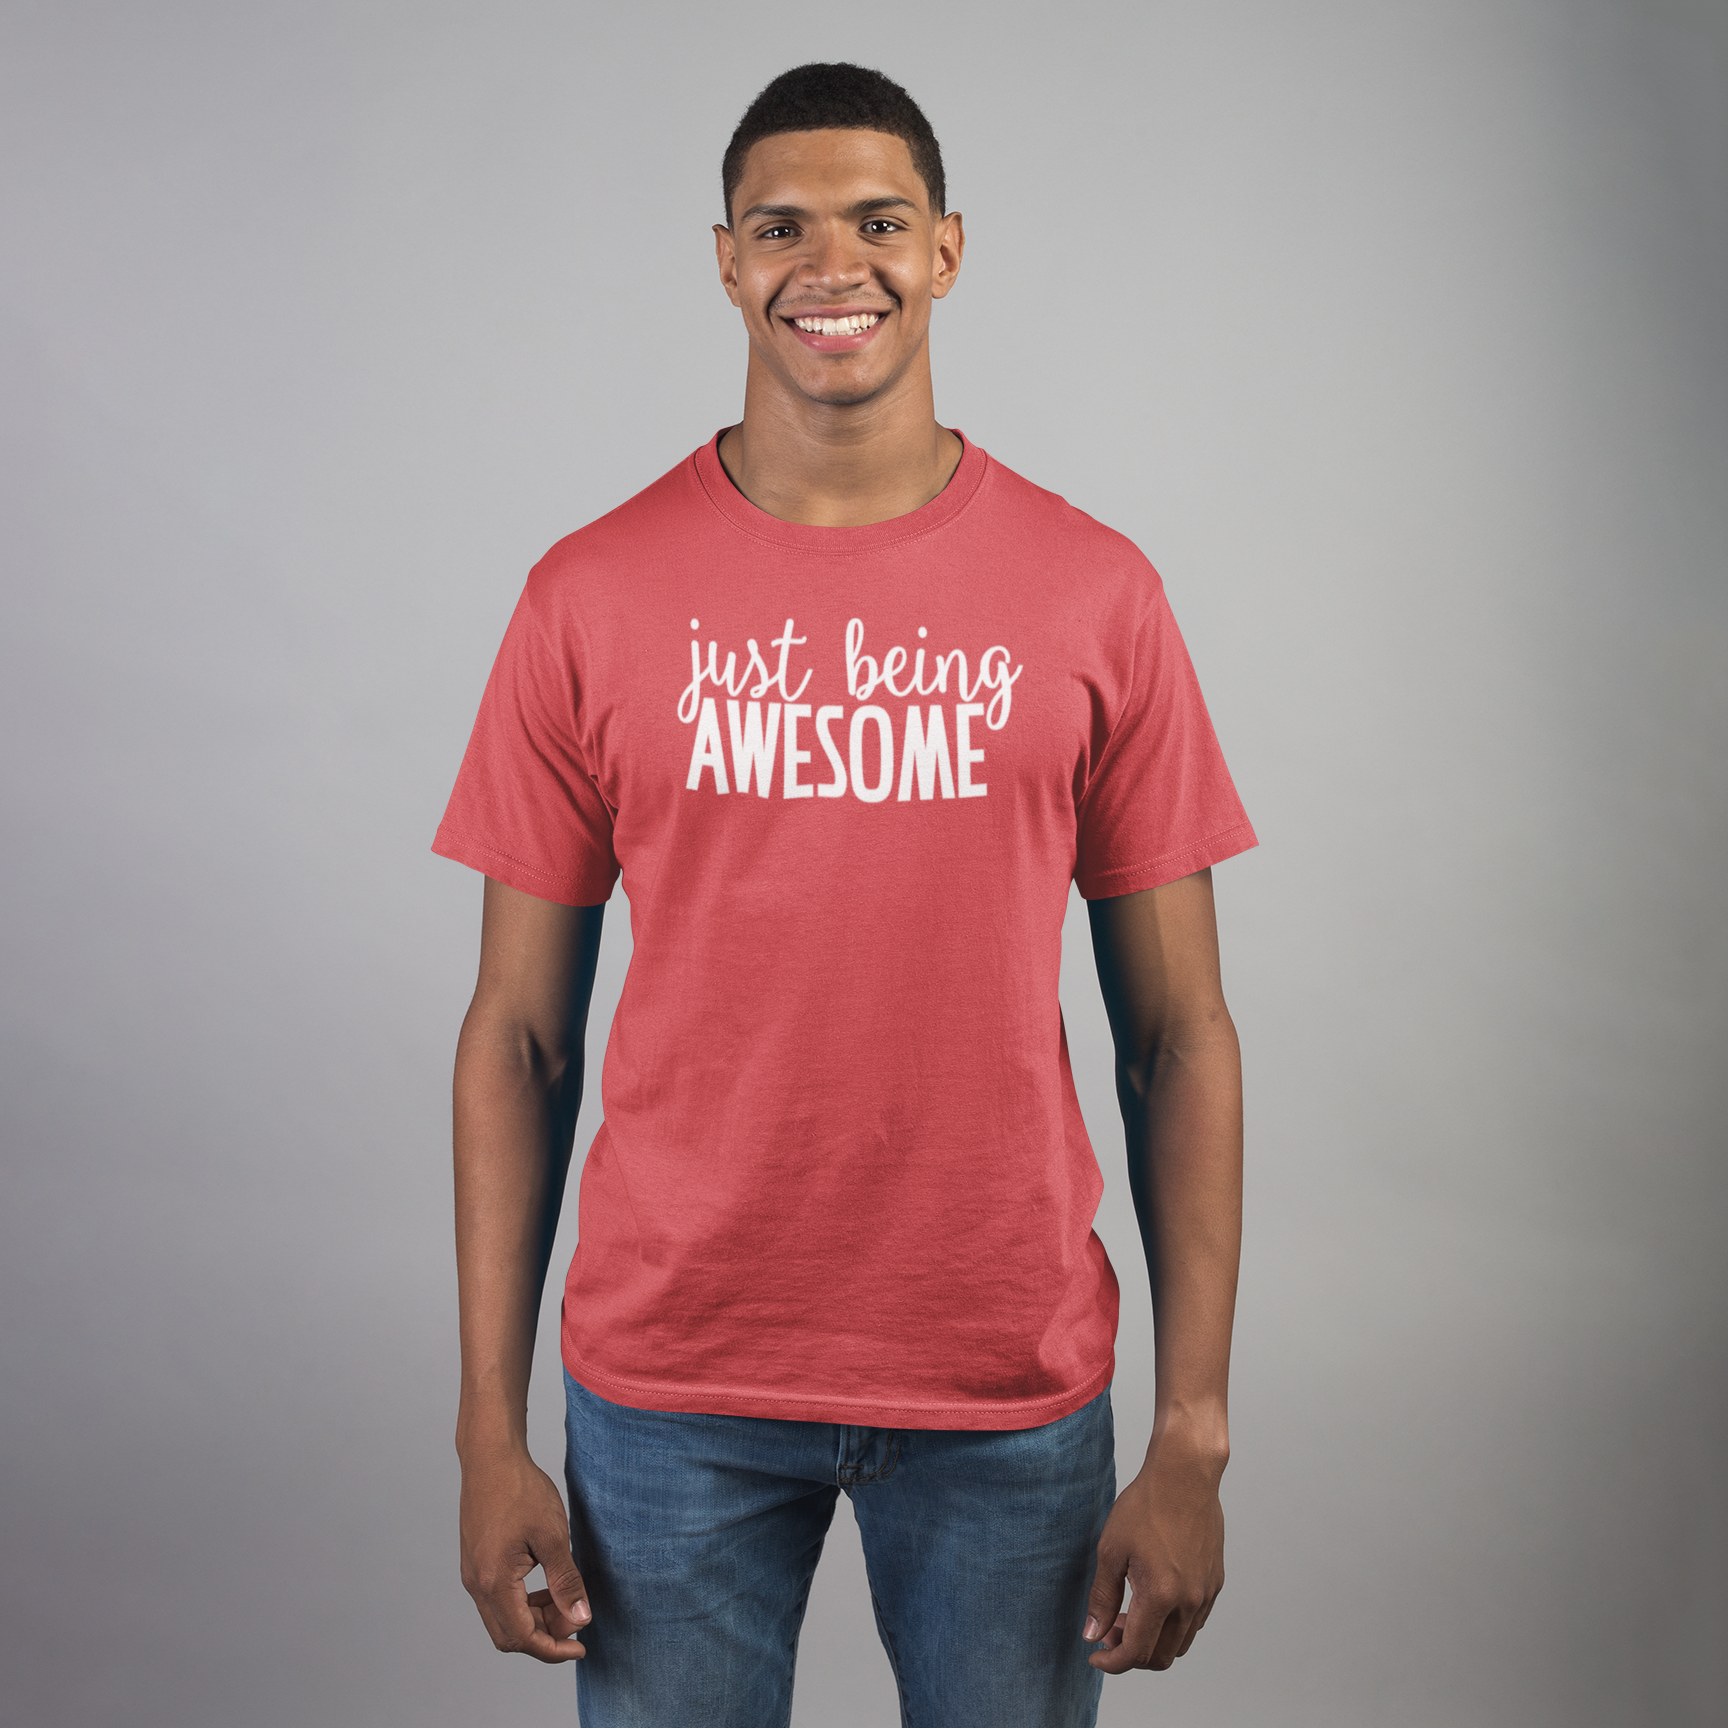 'Just being awesome' adult shirt